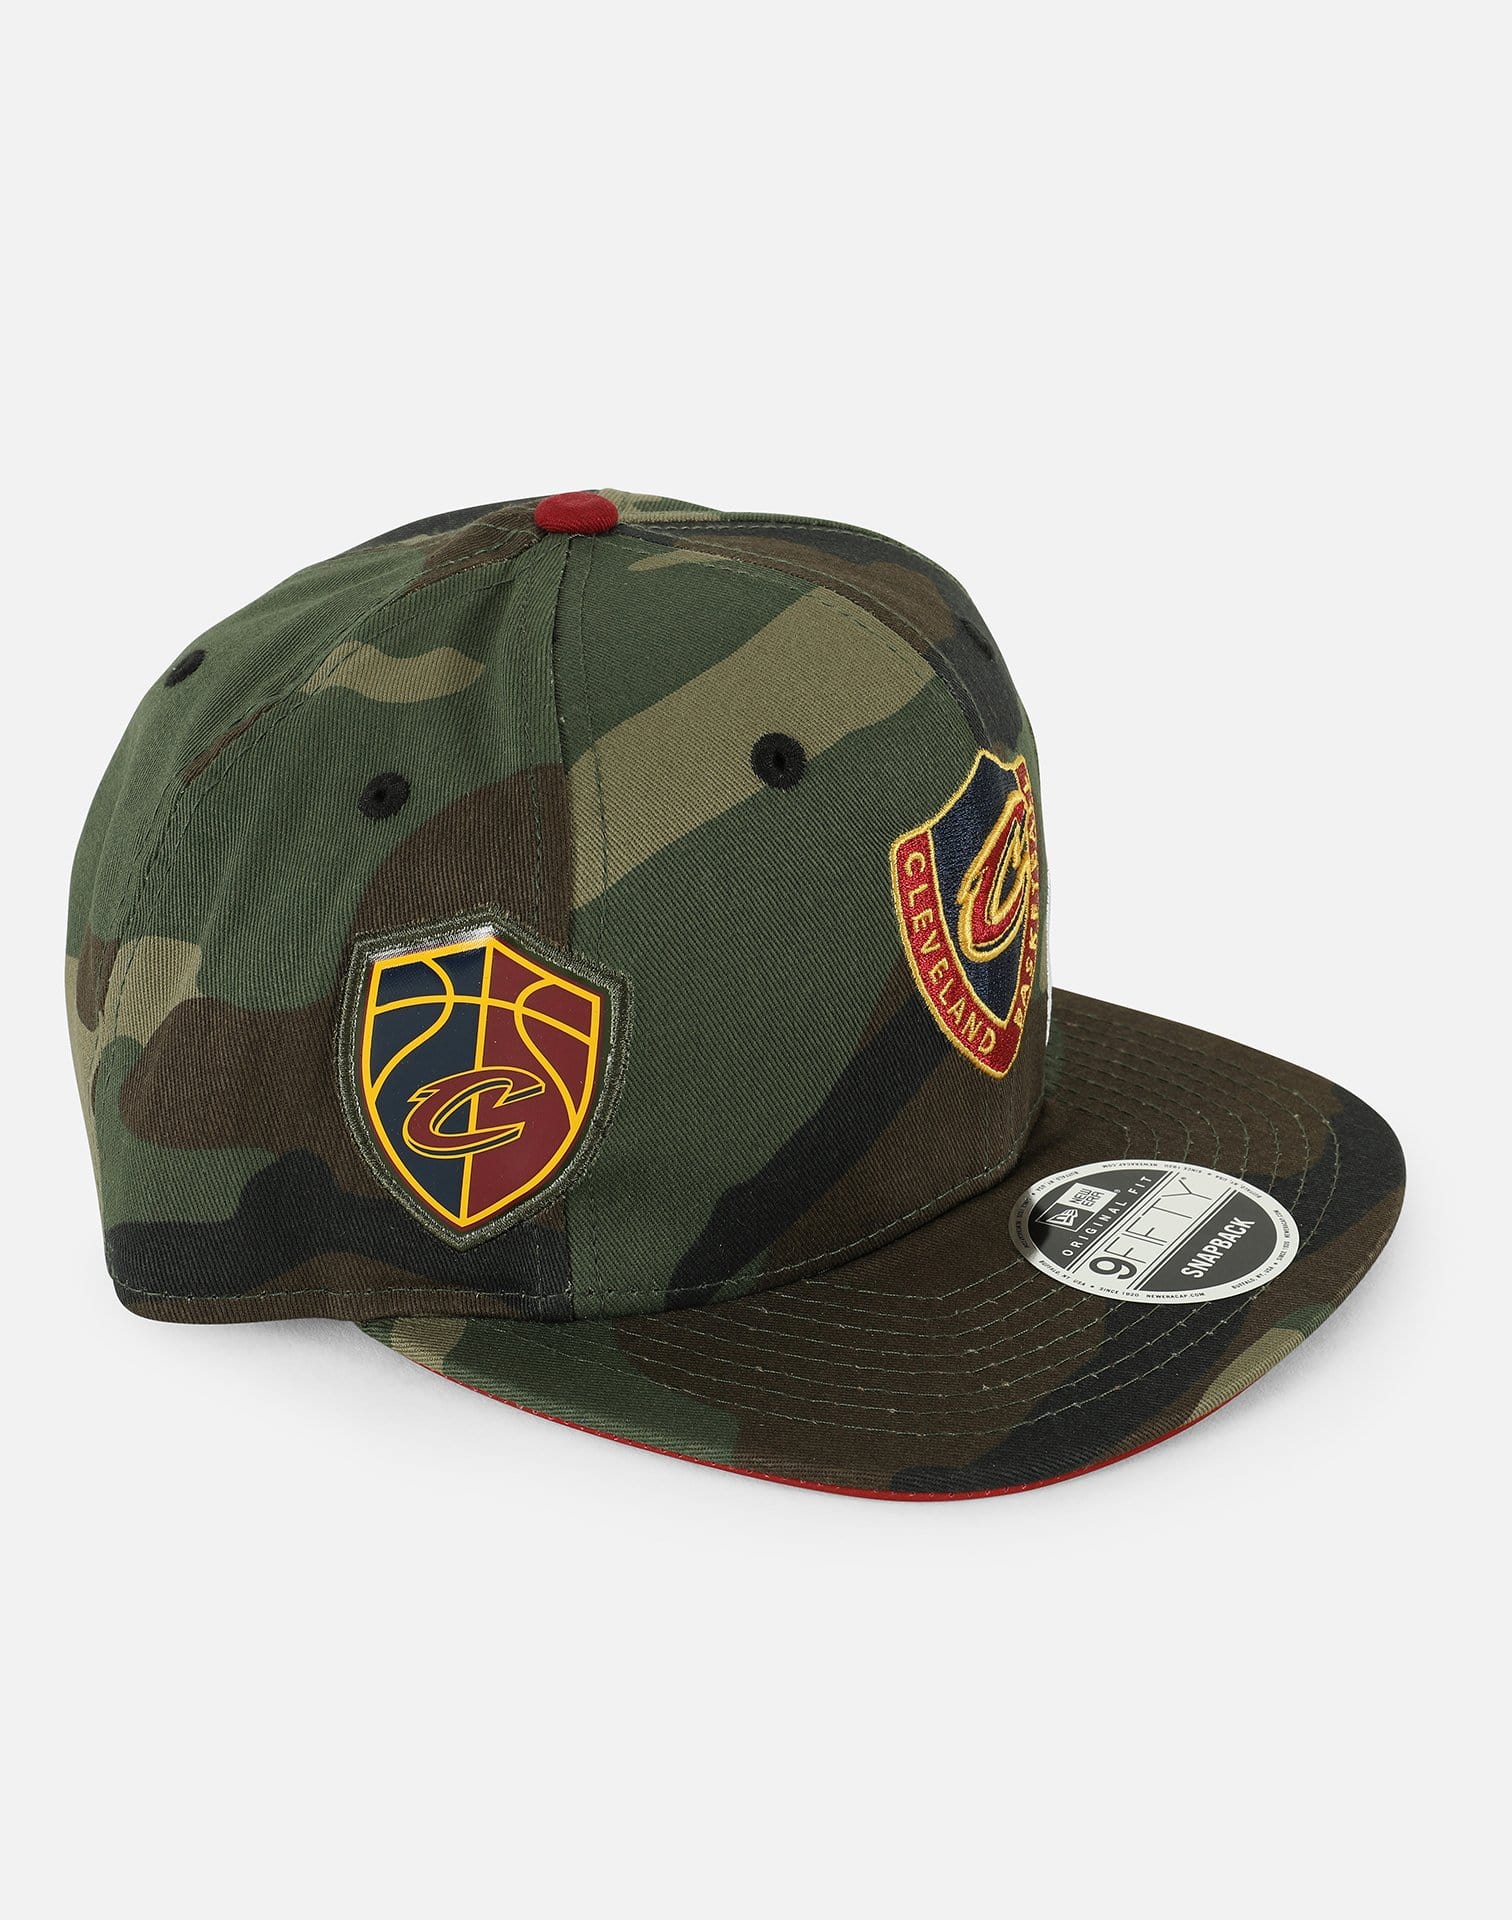 New Era NBA CLEVELAND CAVALIERS WOODLAND PATCH EXCLUSIVE 9FIFTY SNAPBACK